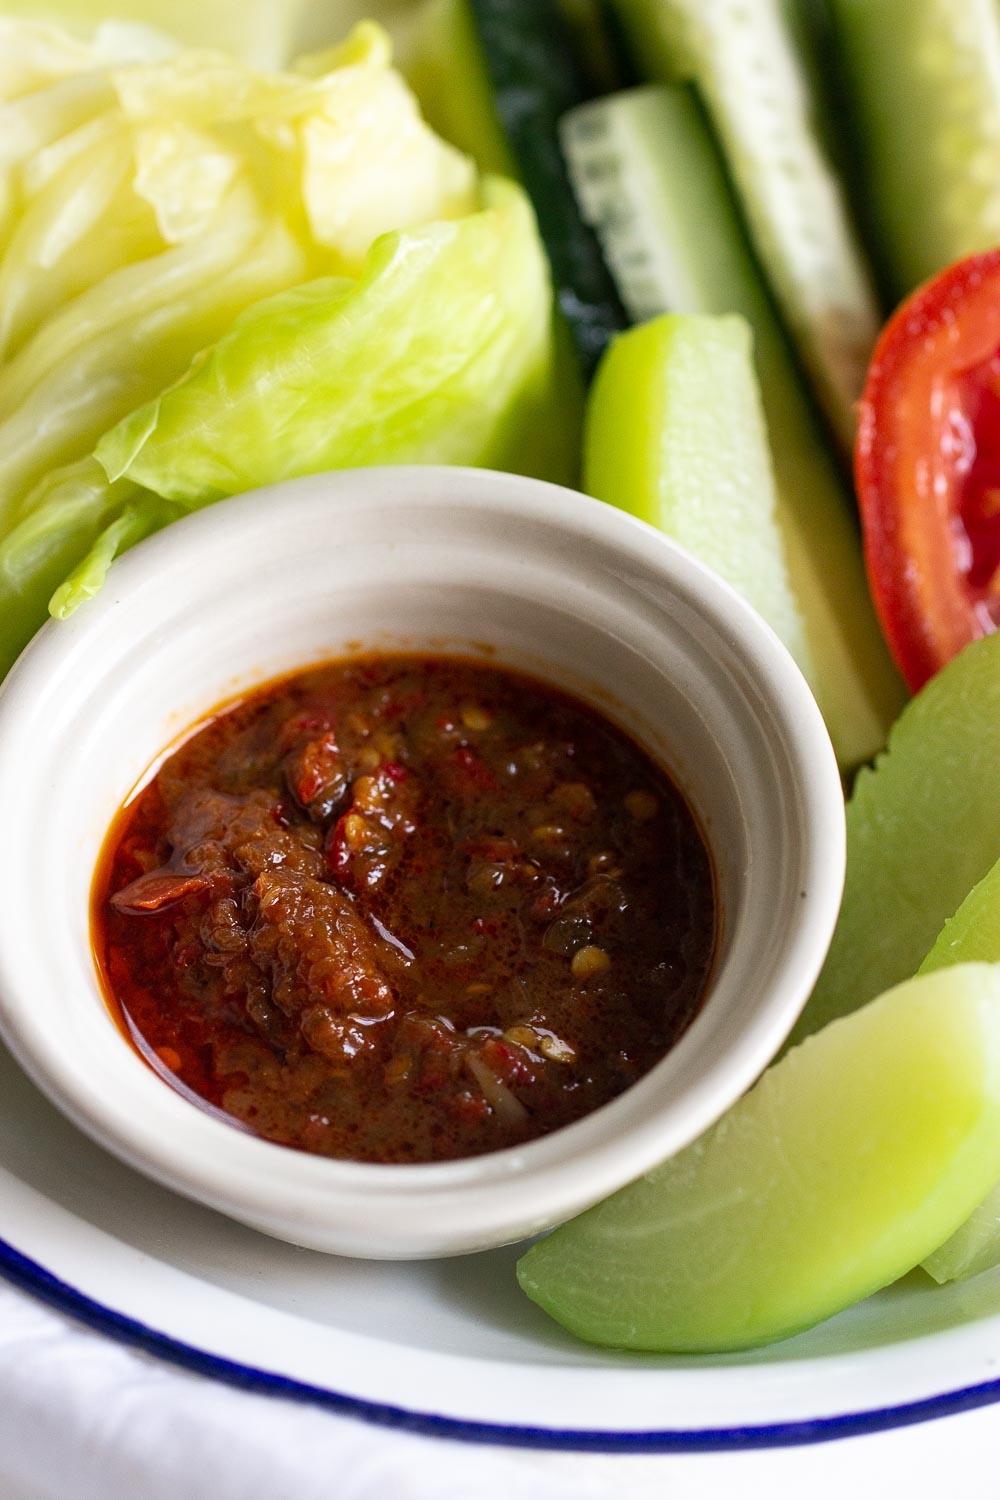 If you're a fan of something spicy, you need to try sambal terasi. Also known as sambal belacan, this spicy condiment is very popular and pairs well with fried chicken or lalapan.